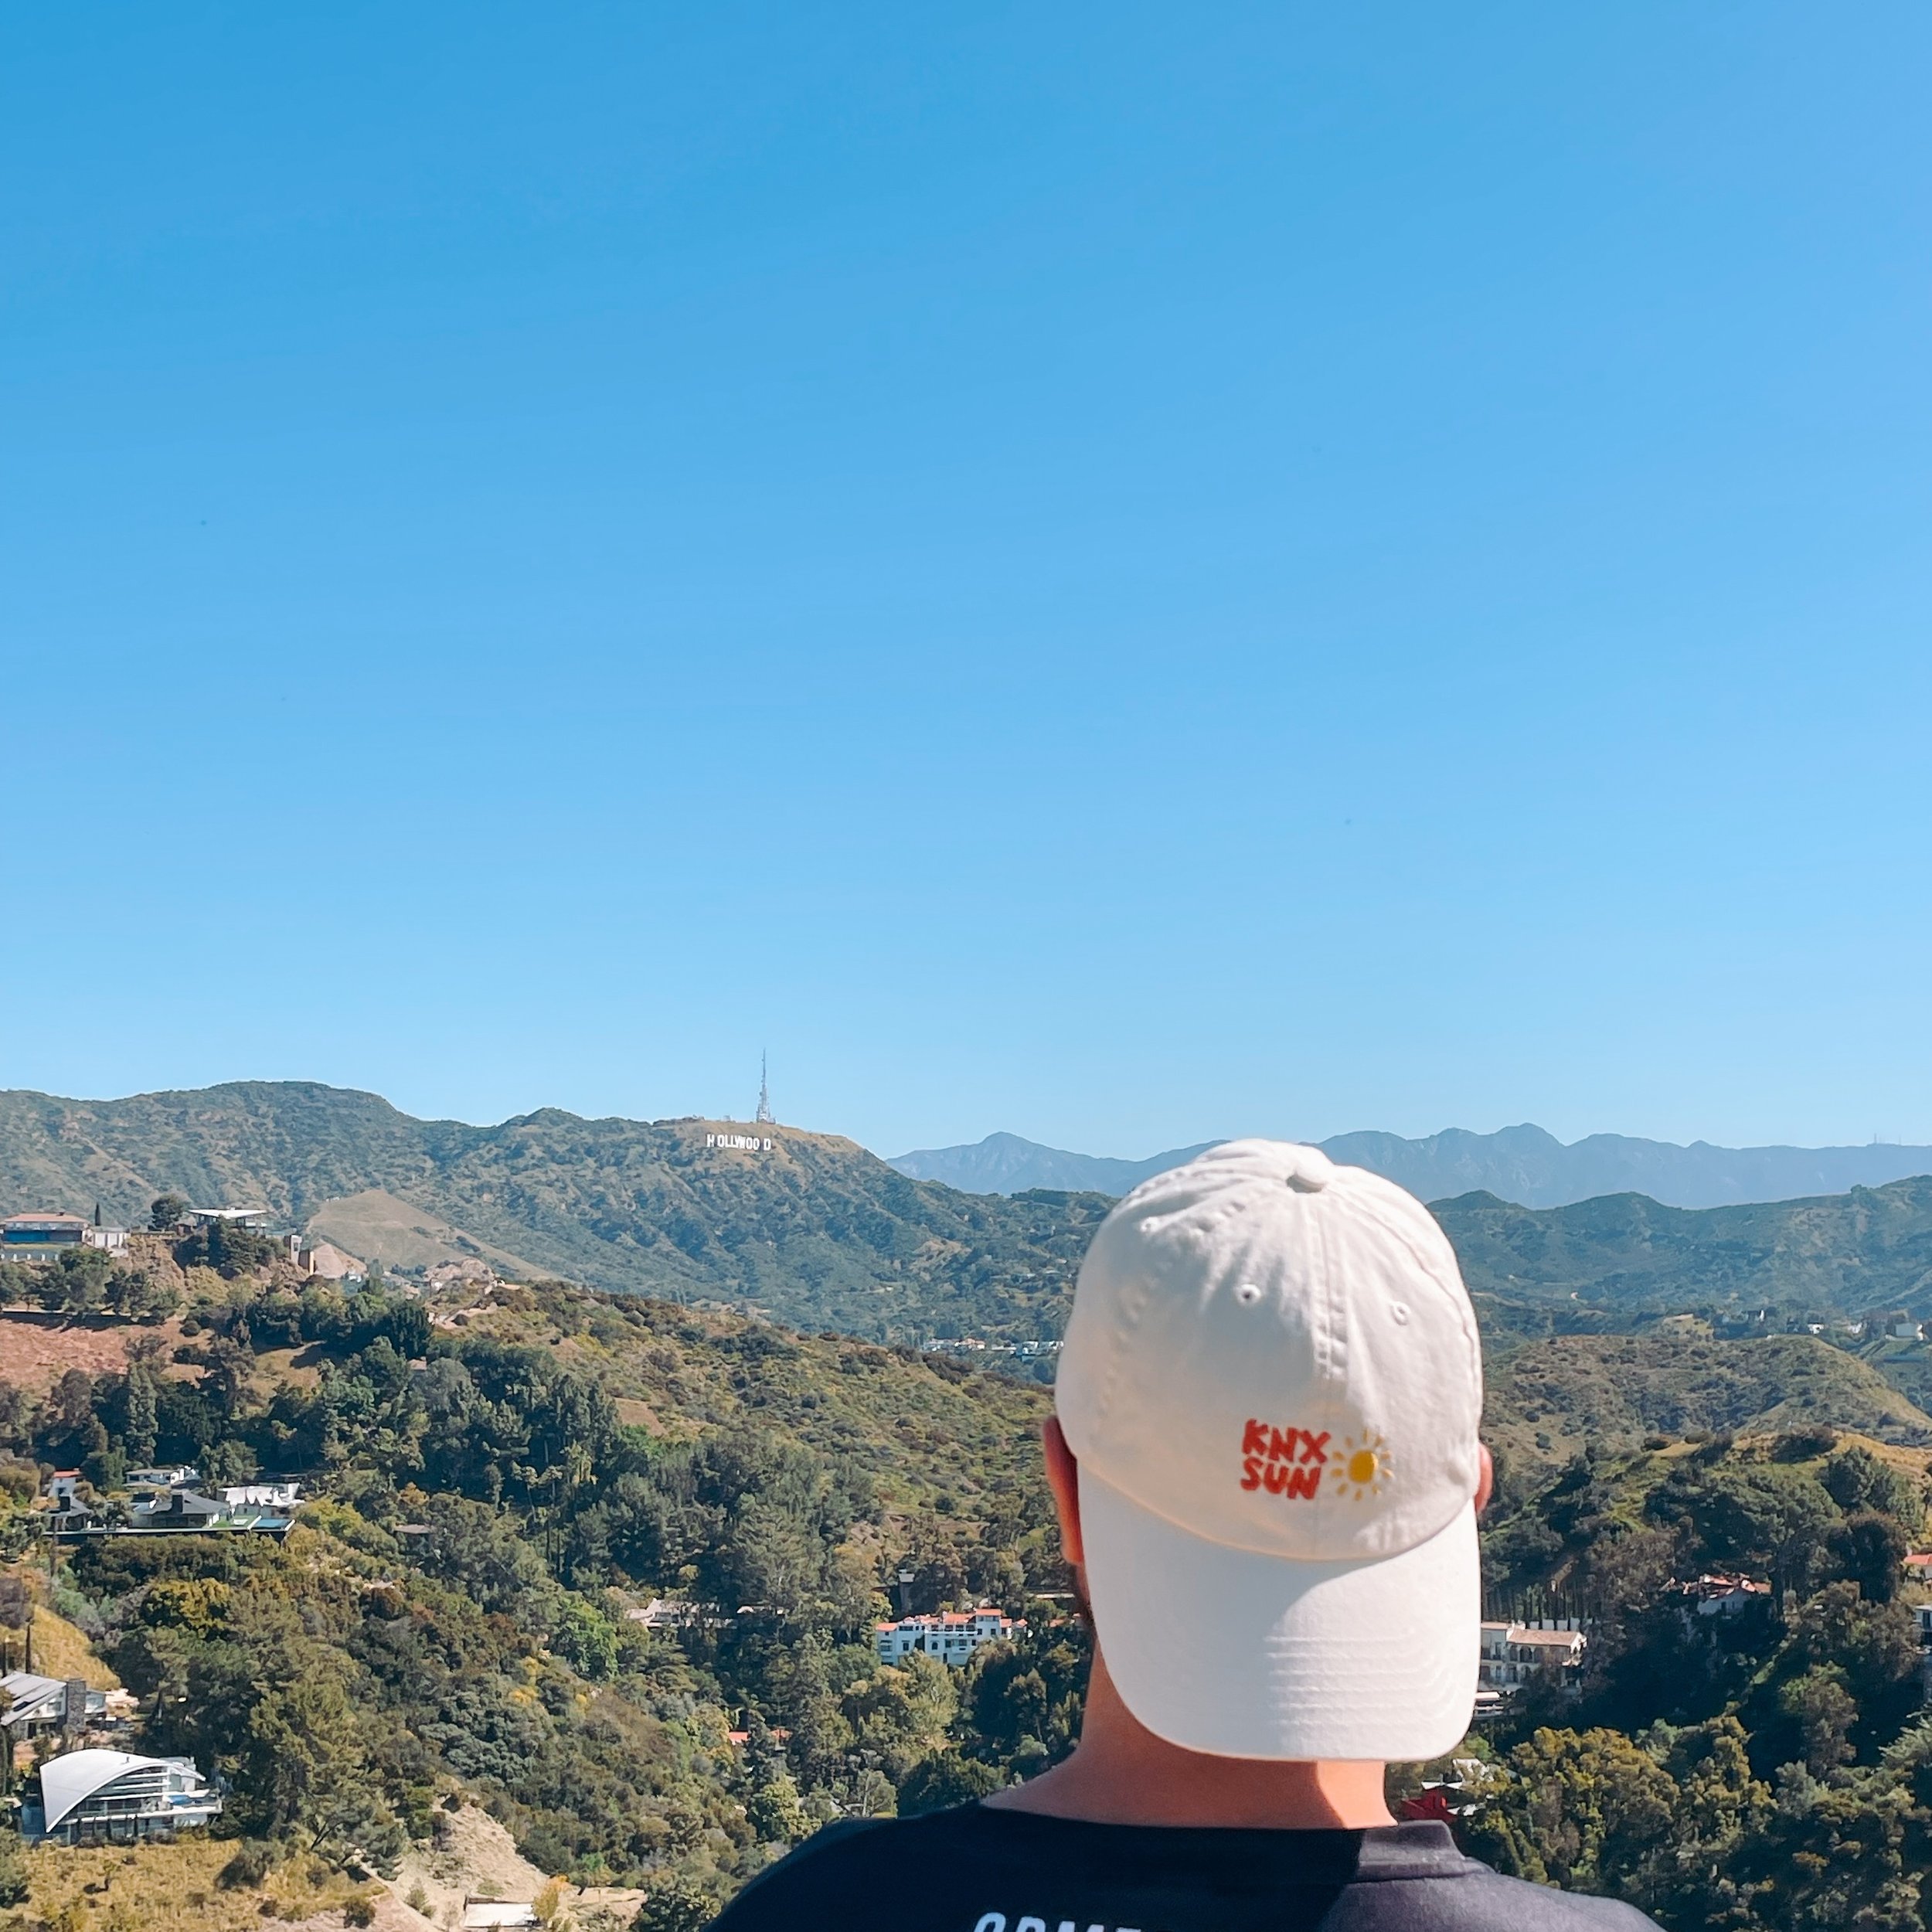 Knx Sun taking the spotlight in Hollywood. Hats are available for purchase at the @kimberleycafe!